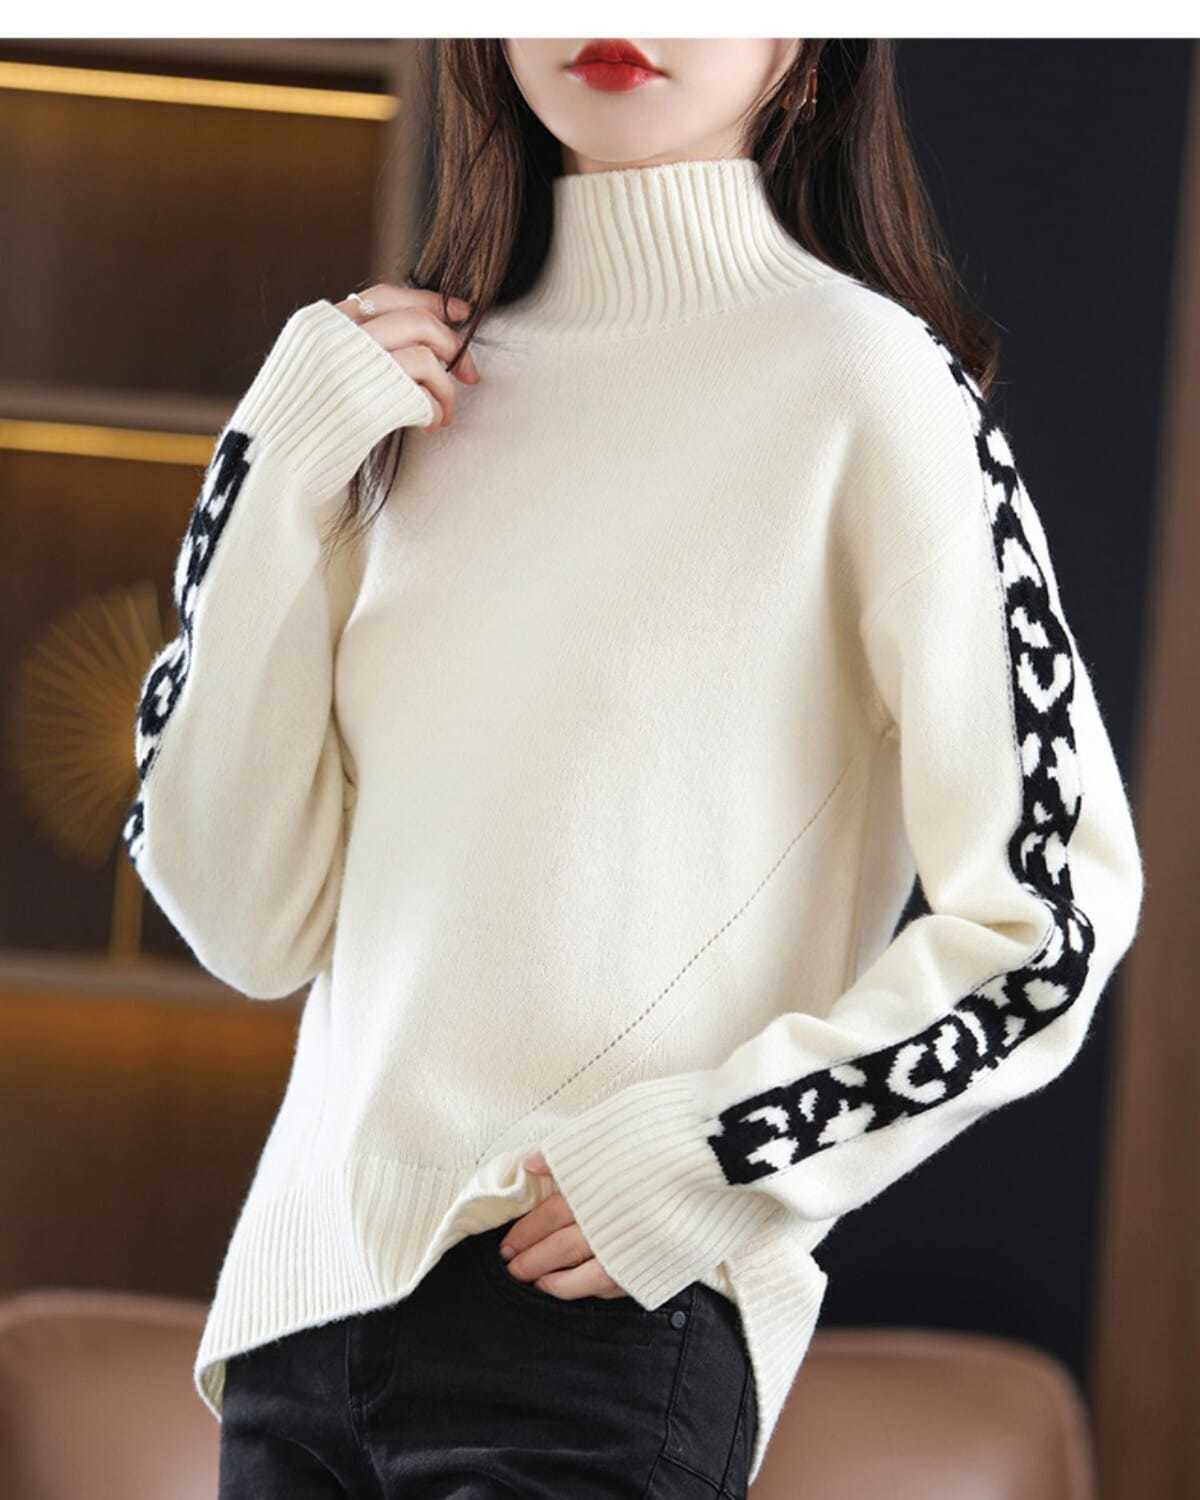 Turtleneck loose sweater with spliced